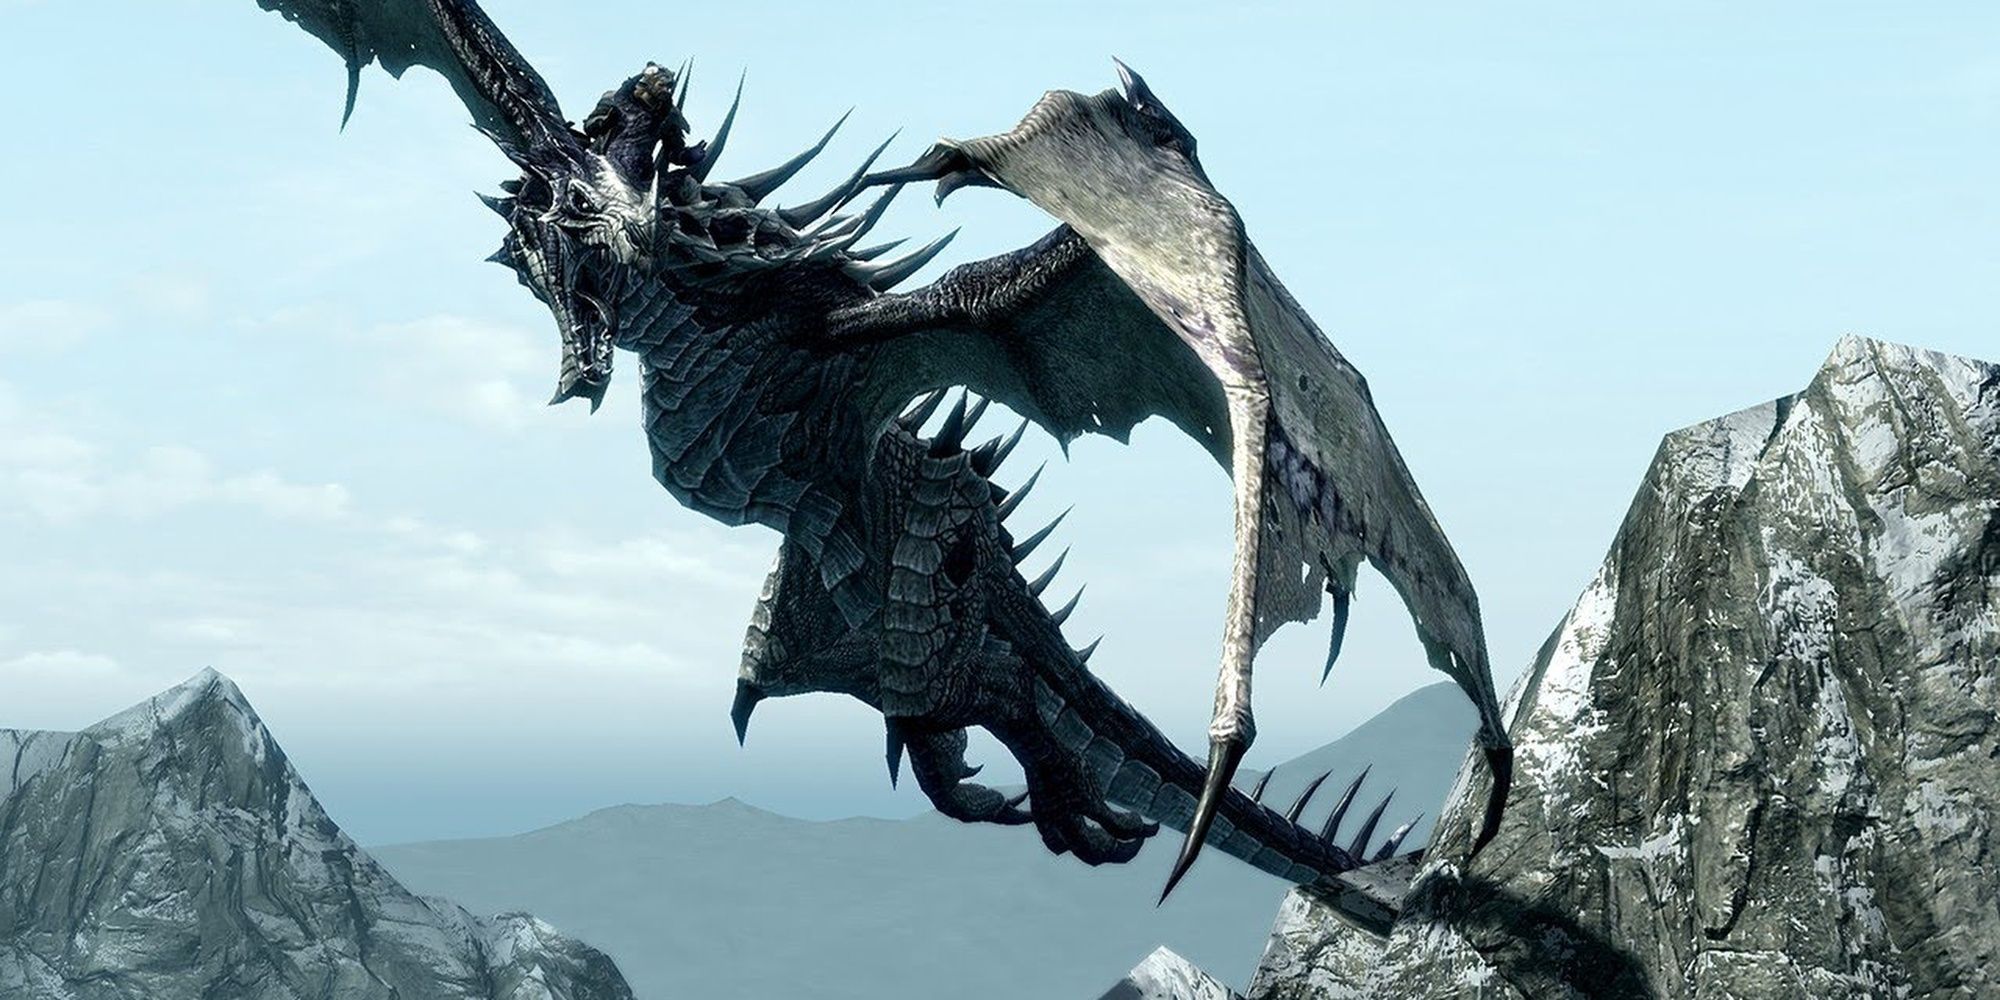 A dragon from Skyrim